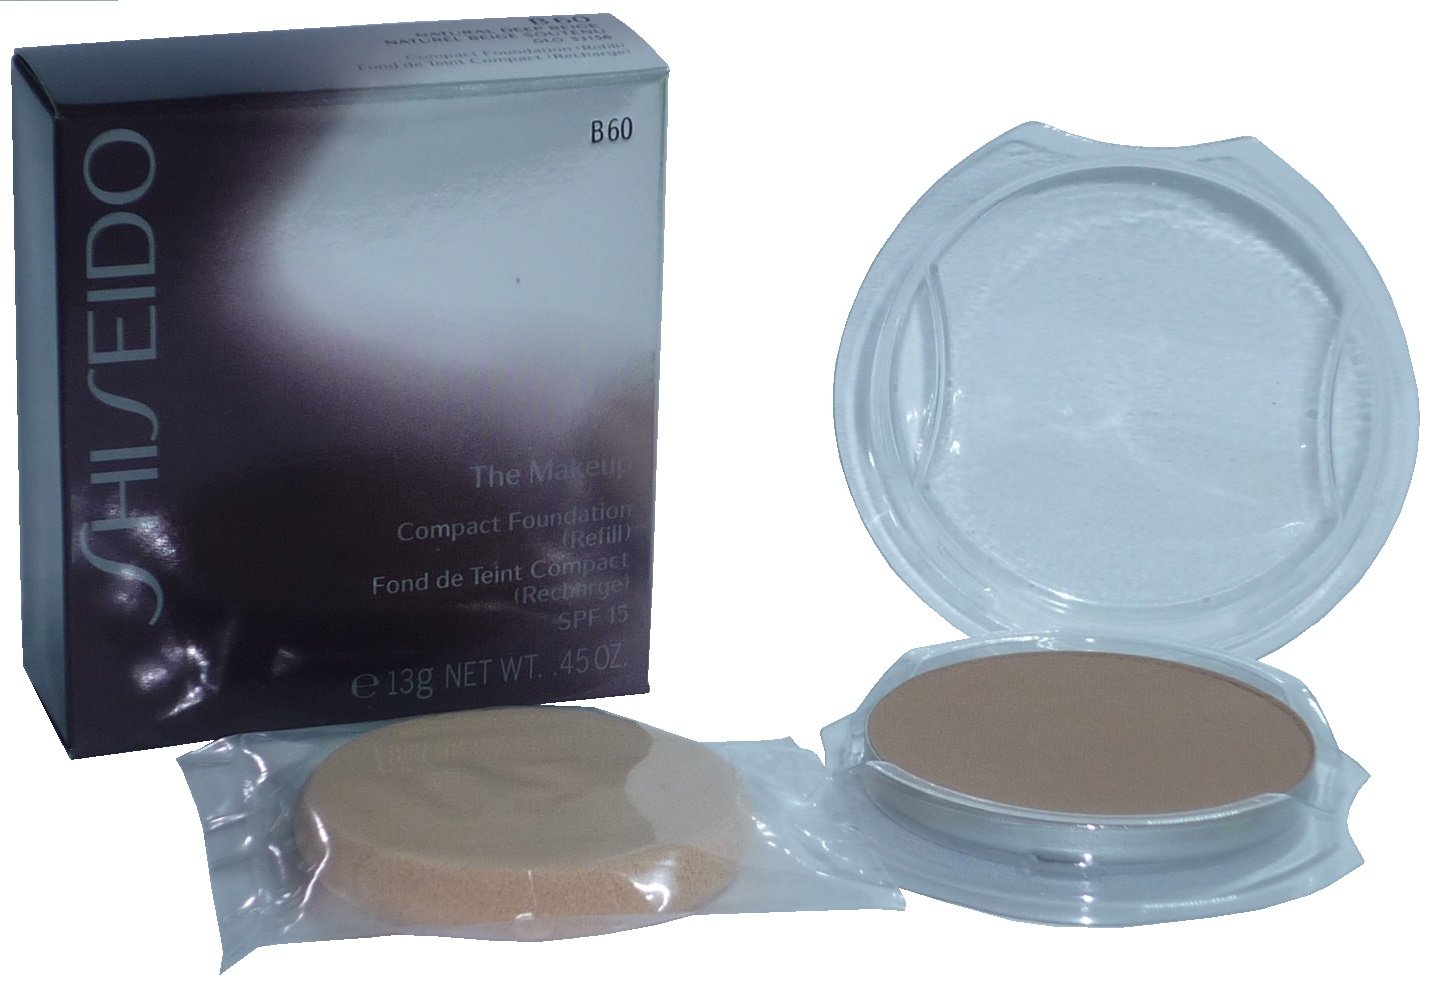 Shiseido The Makeup Compact Foundation Refill/Refill) – B60 Natural Deep Beige 13g, Pack of 1